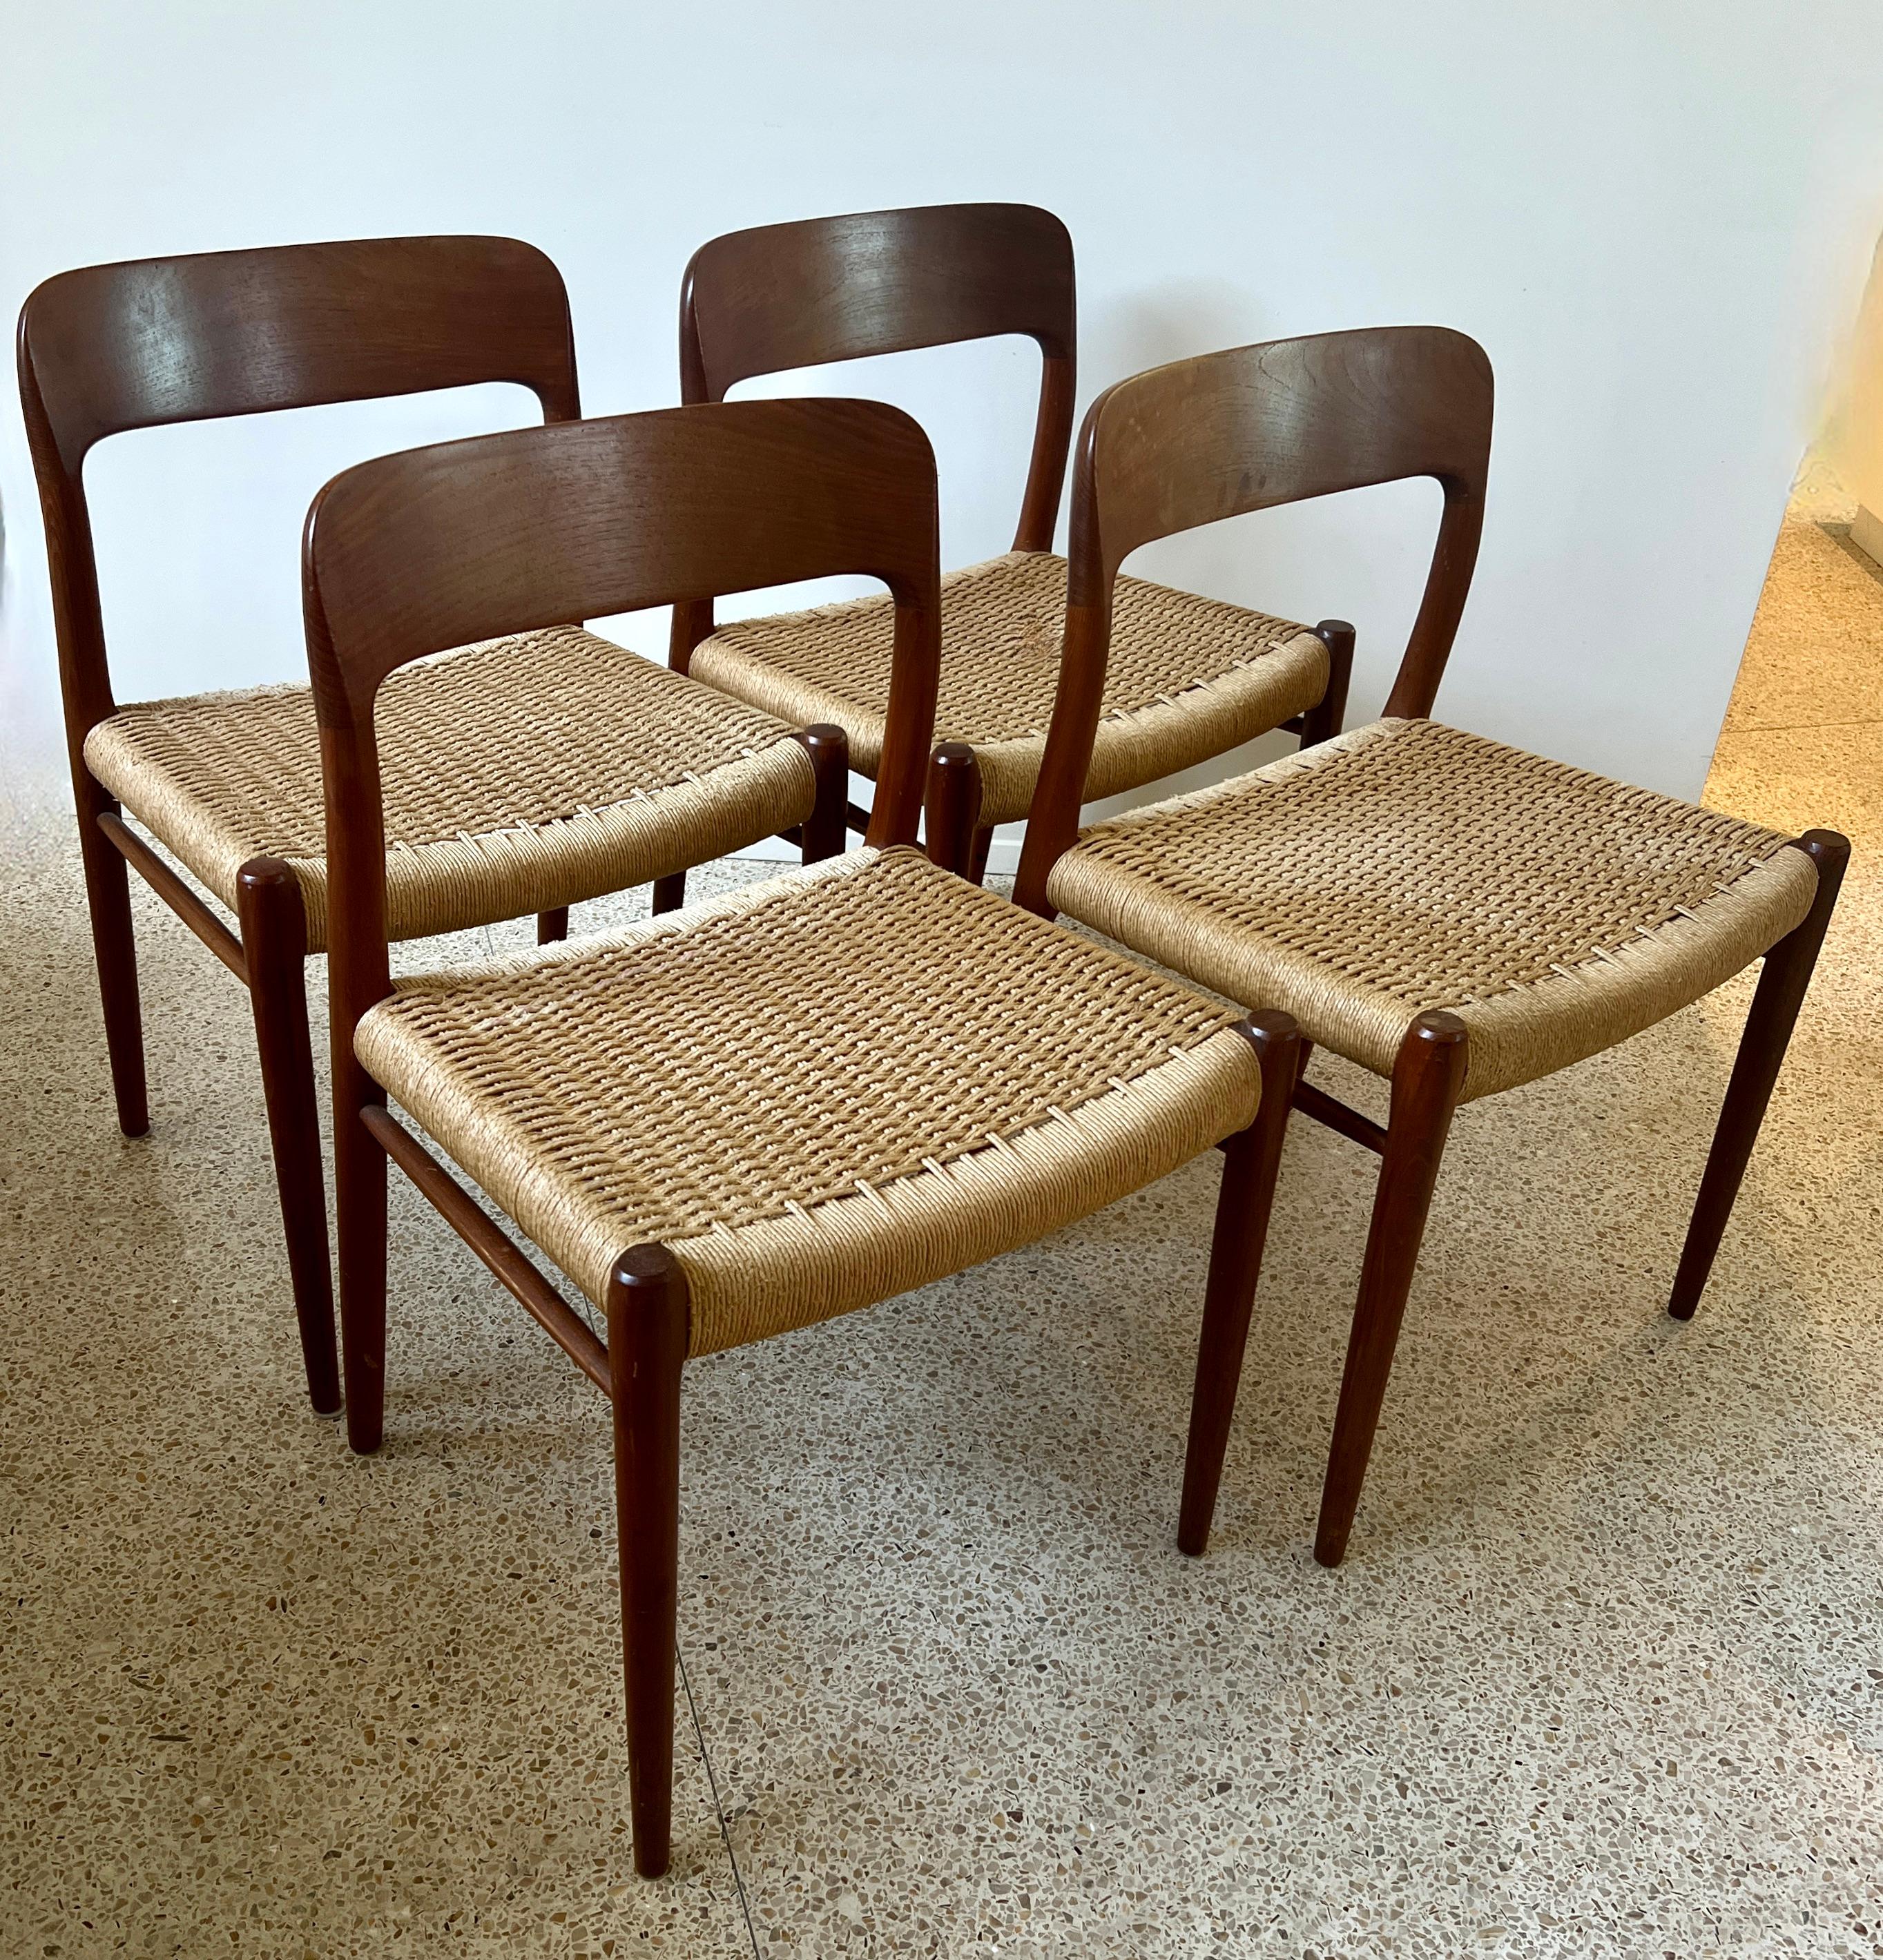 A set of four Danish Modern Dining or occasional Chairs by Niels Otto Moller 

The design is classic Danish Sleek and modern with intricate hand crafted and hand woven Papercord seats.

A compliment to any Mid Century Modern home as a dining chair,